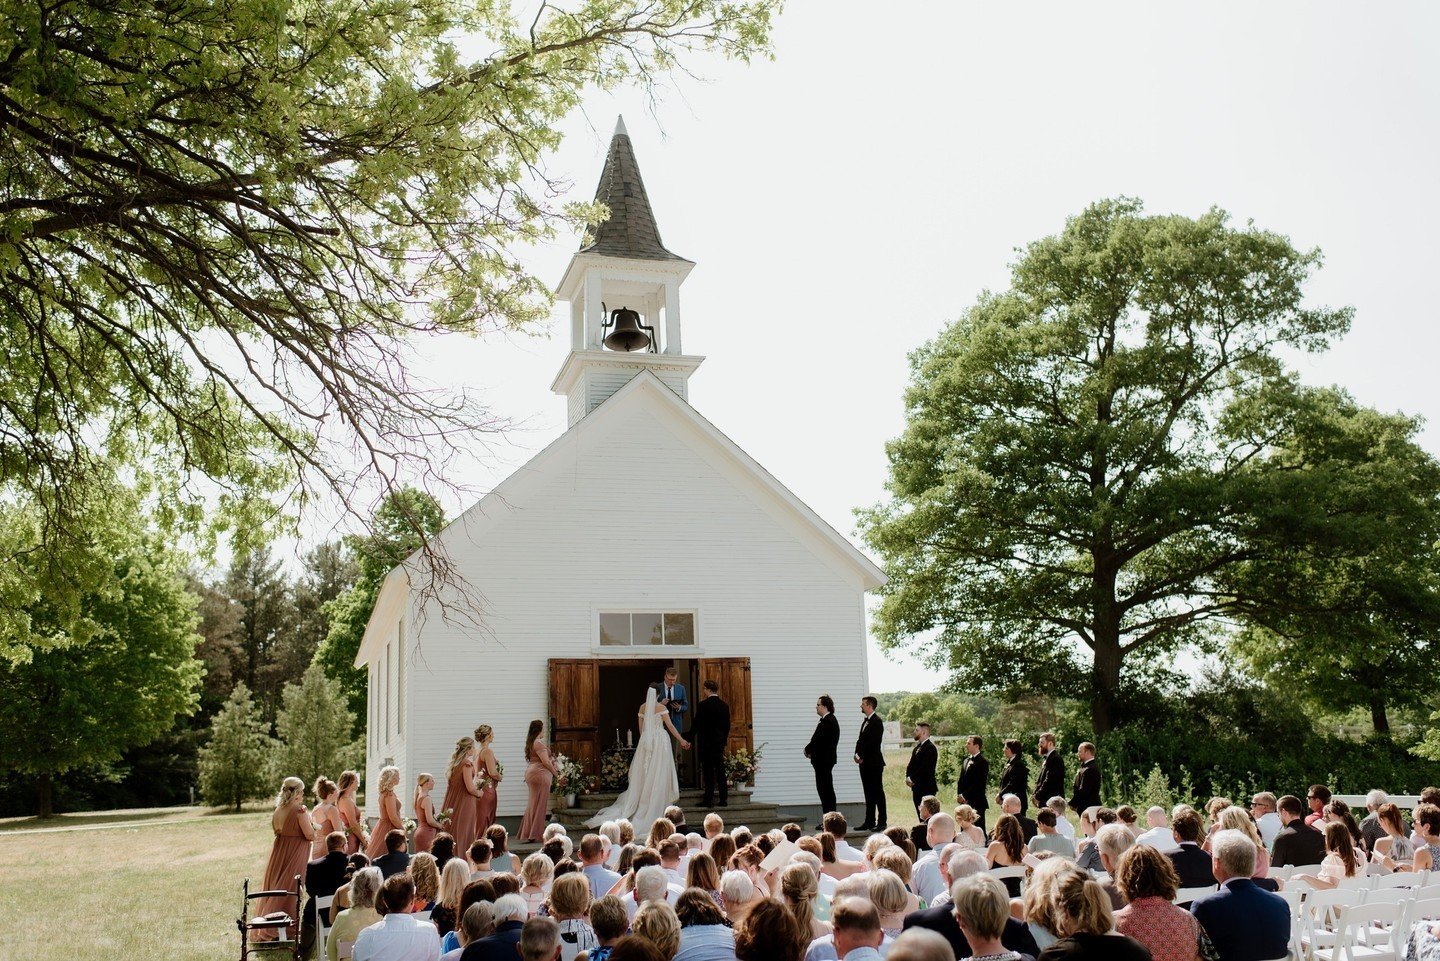 There's nothing quite like that newlywed feeling! Just ask the hundreds of couples who have said &quot;I do&quot; at the historic white chapel! The chapel has been a setting for weddings dating back to 1904 including Dorothea Felt's (daughter of Agne